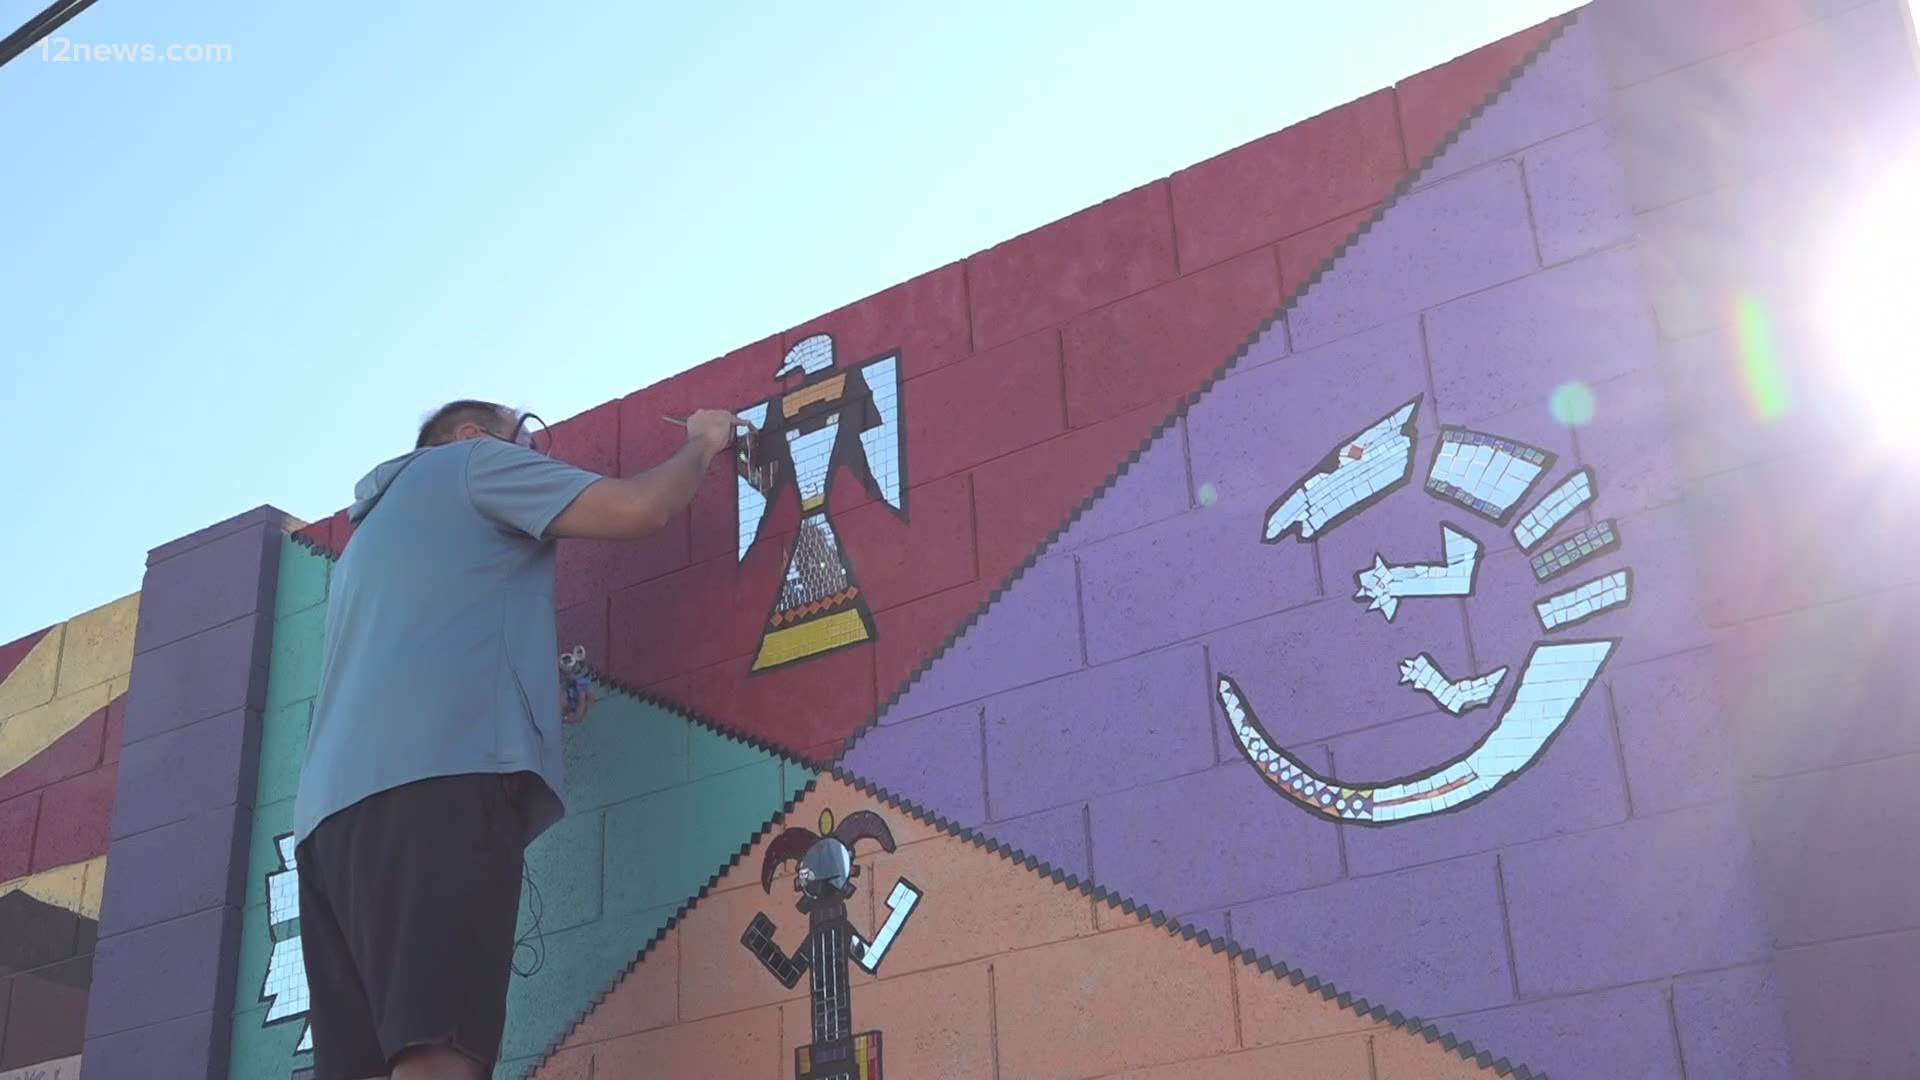 A Valley special education teacher is spending his free time making his neighborhood more colorful. He's turning block walls into pieces of art everyone can enjoy.